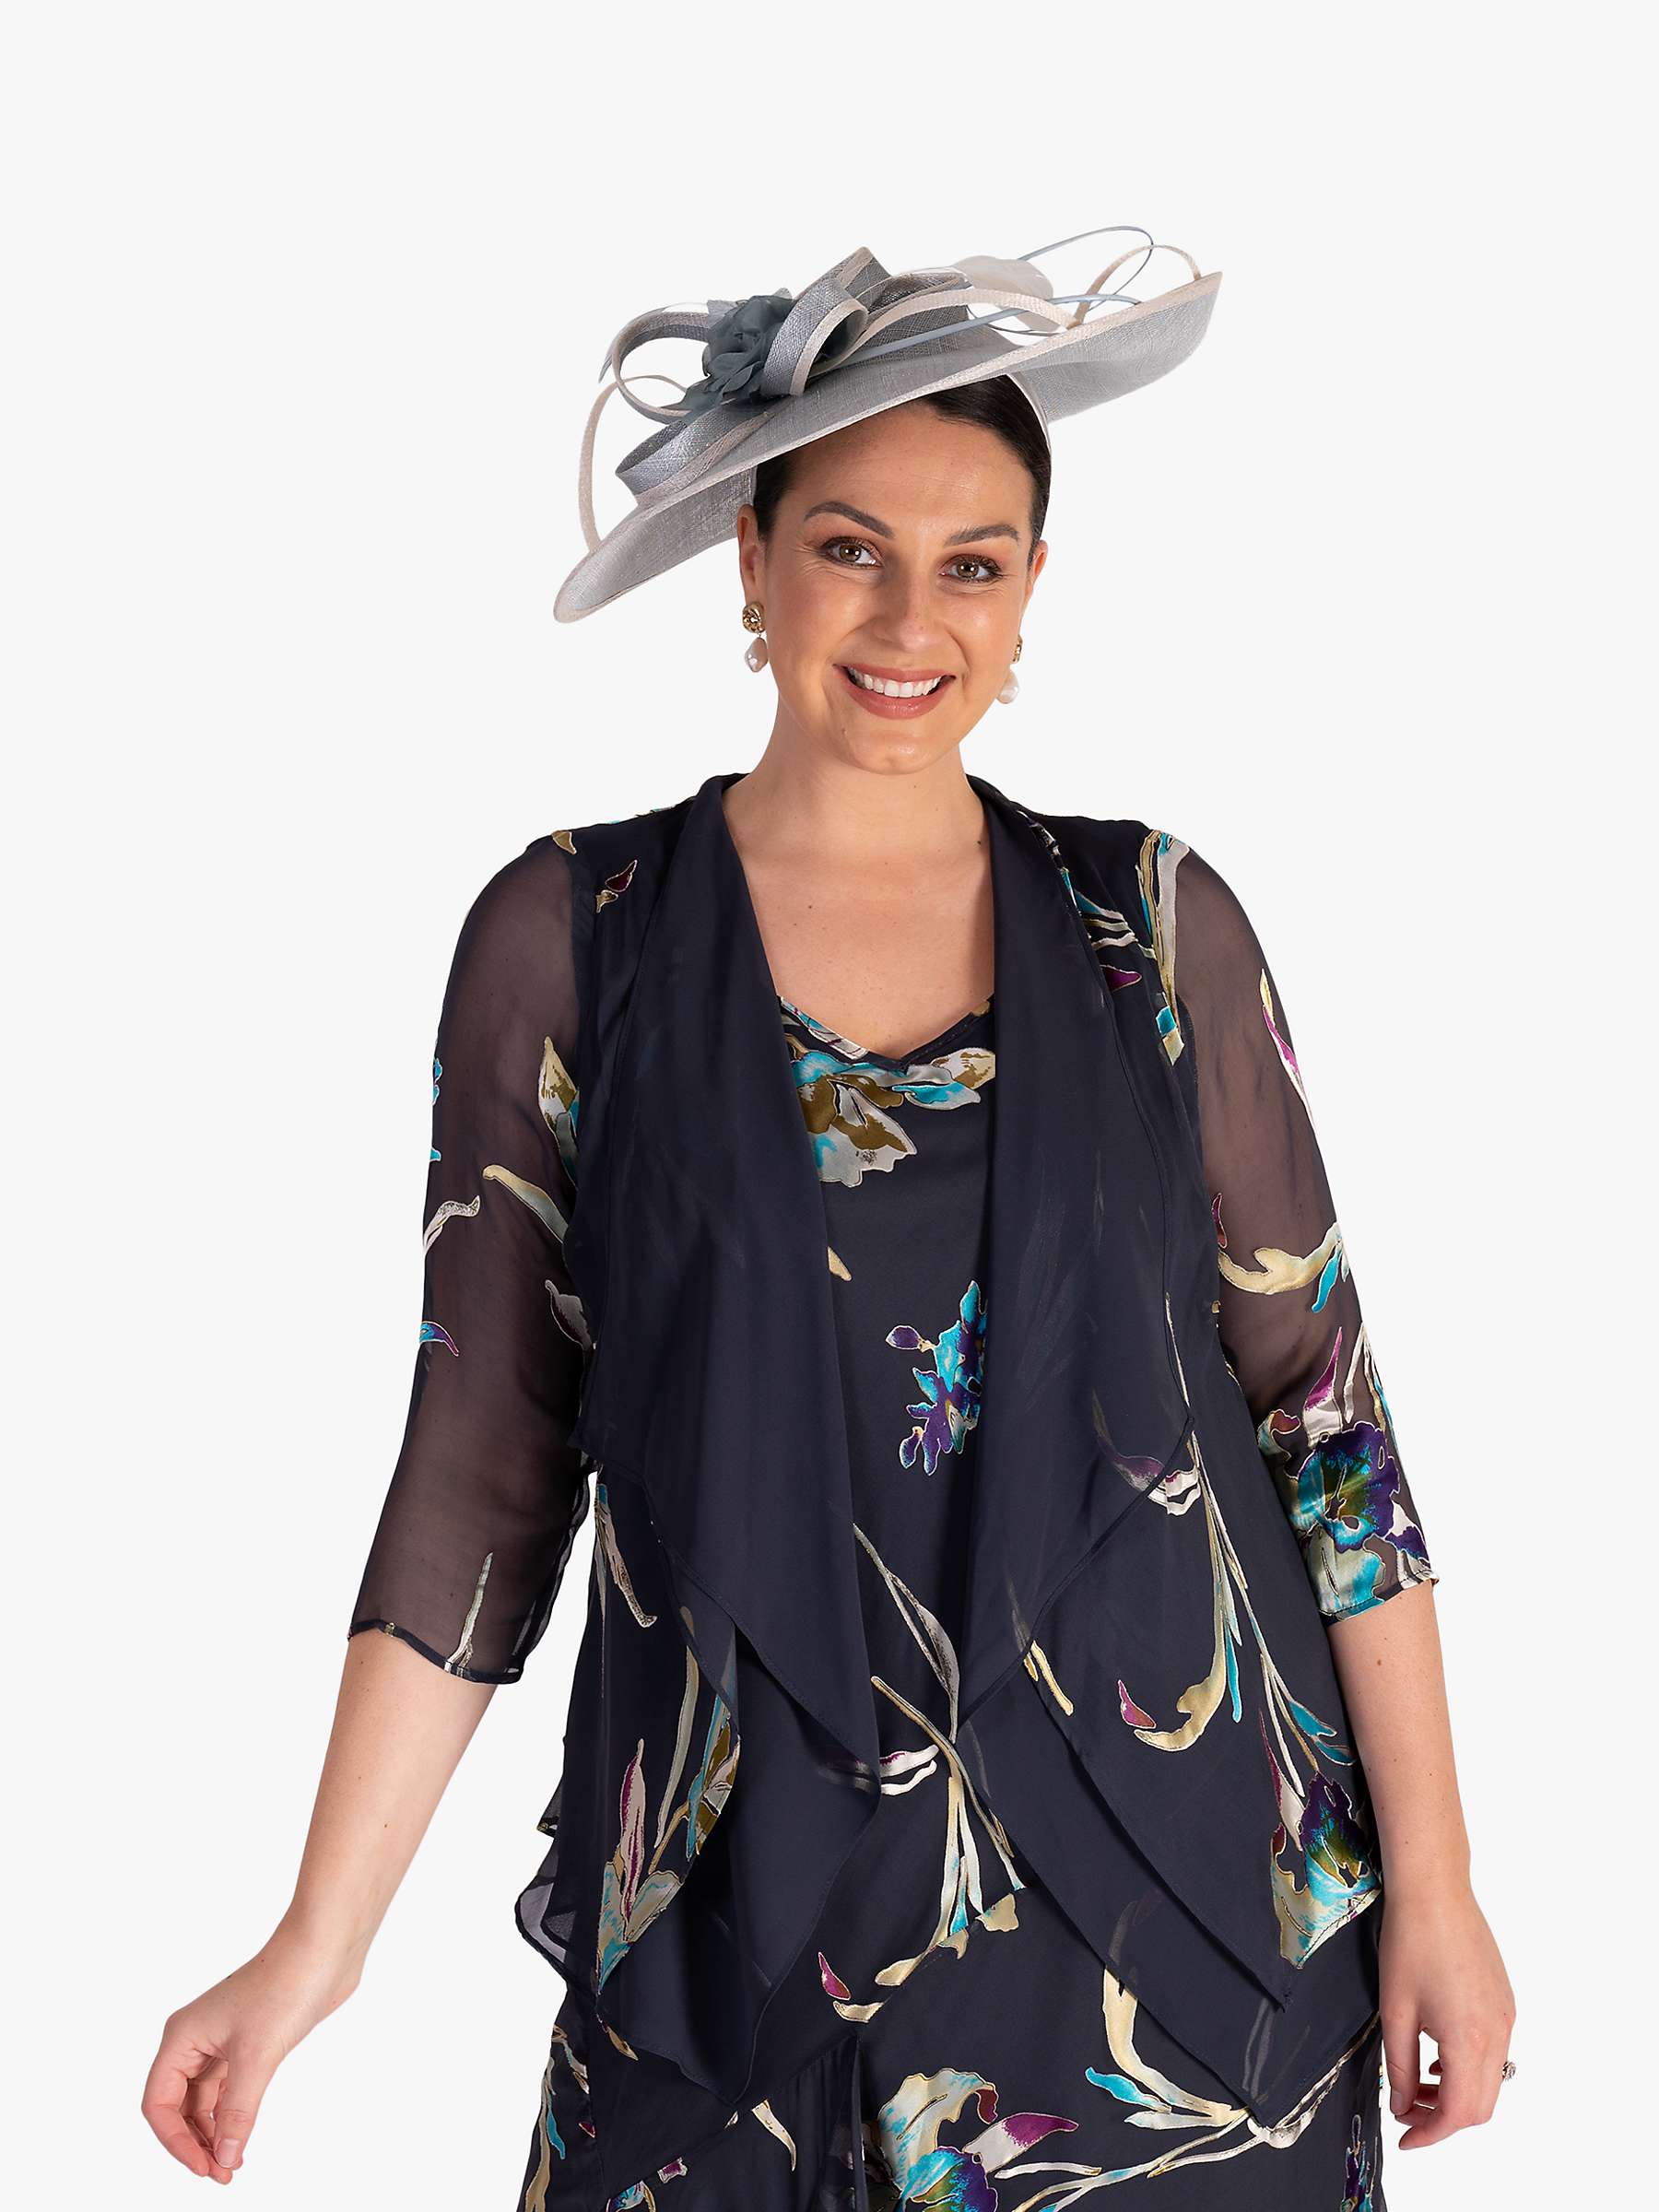 Buy chesca Large Contrast Hatinator Online at johnlewis.com